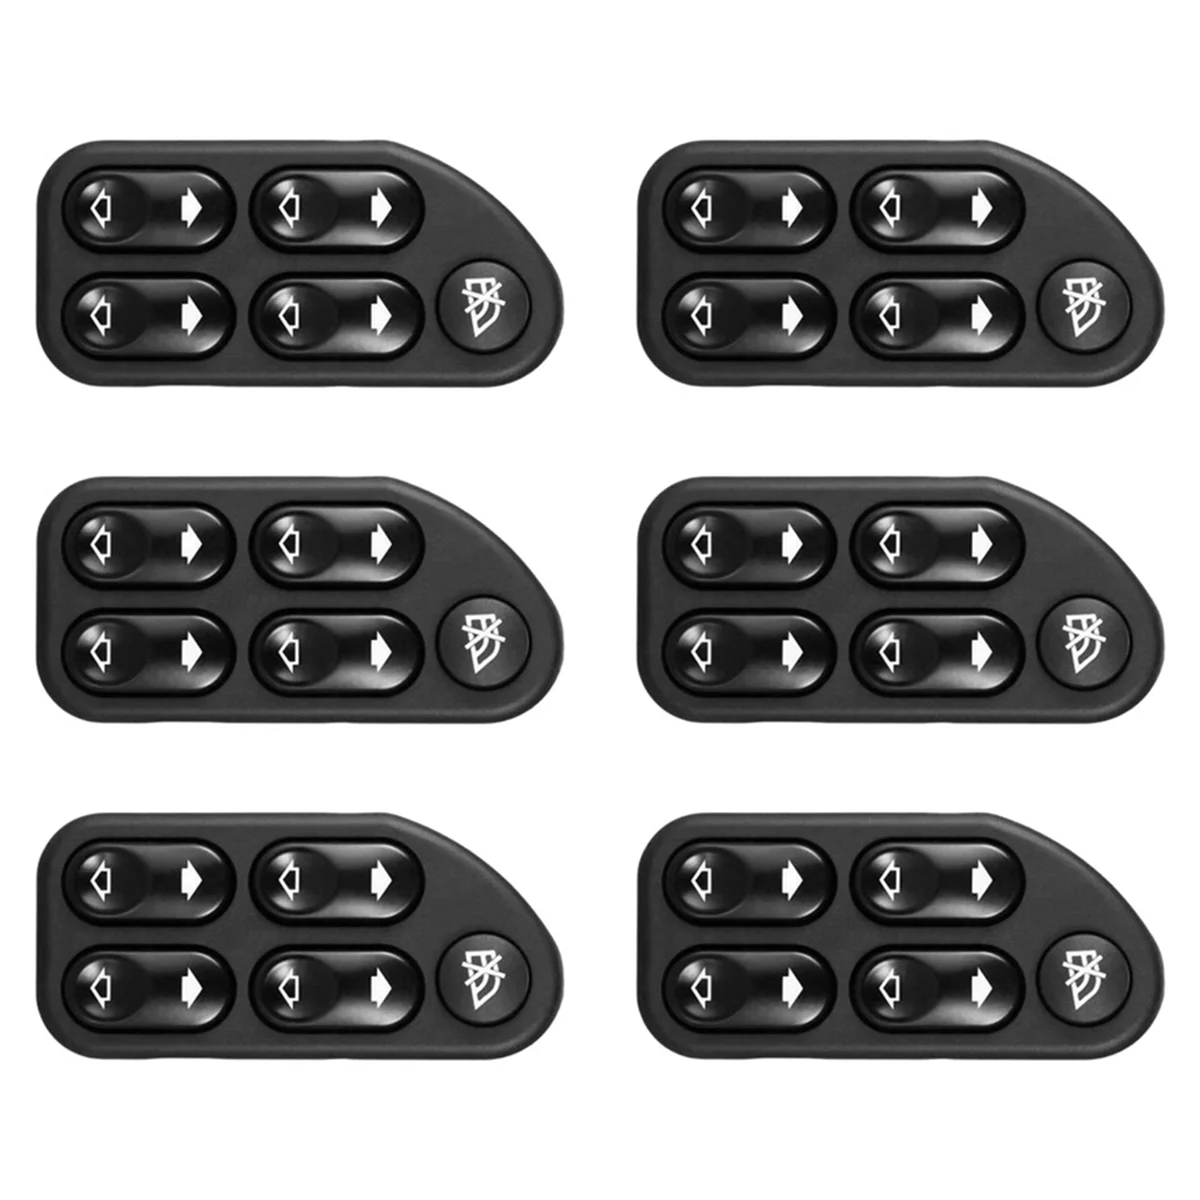 

6X New Power Master Window Control Switch Fit for Ford Ranger Fiesta Ecosport 2004-2008 7S6514529AA